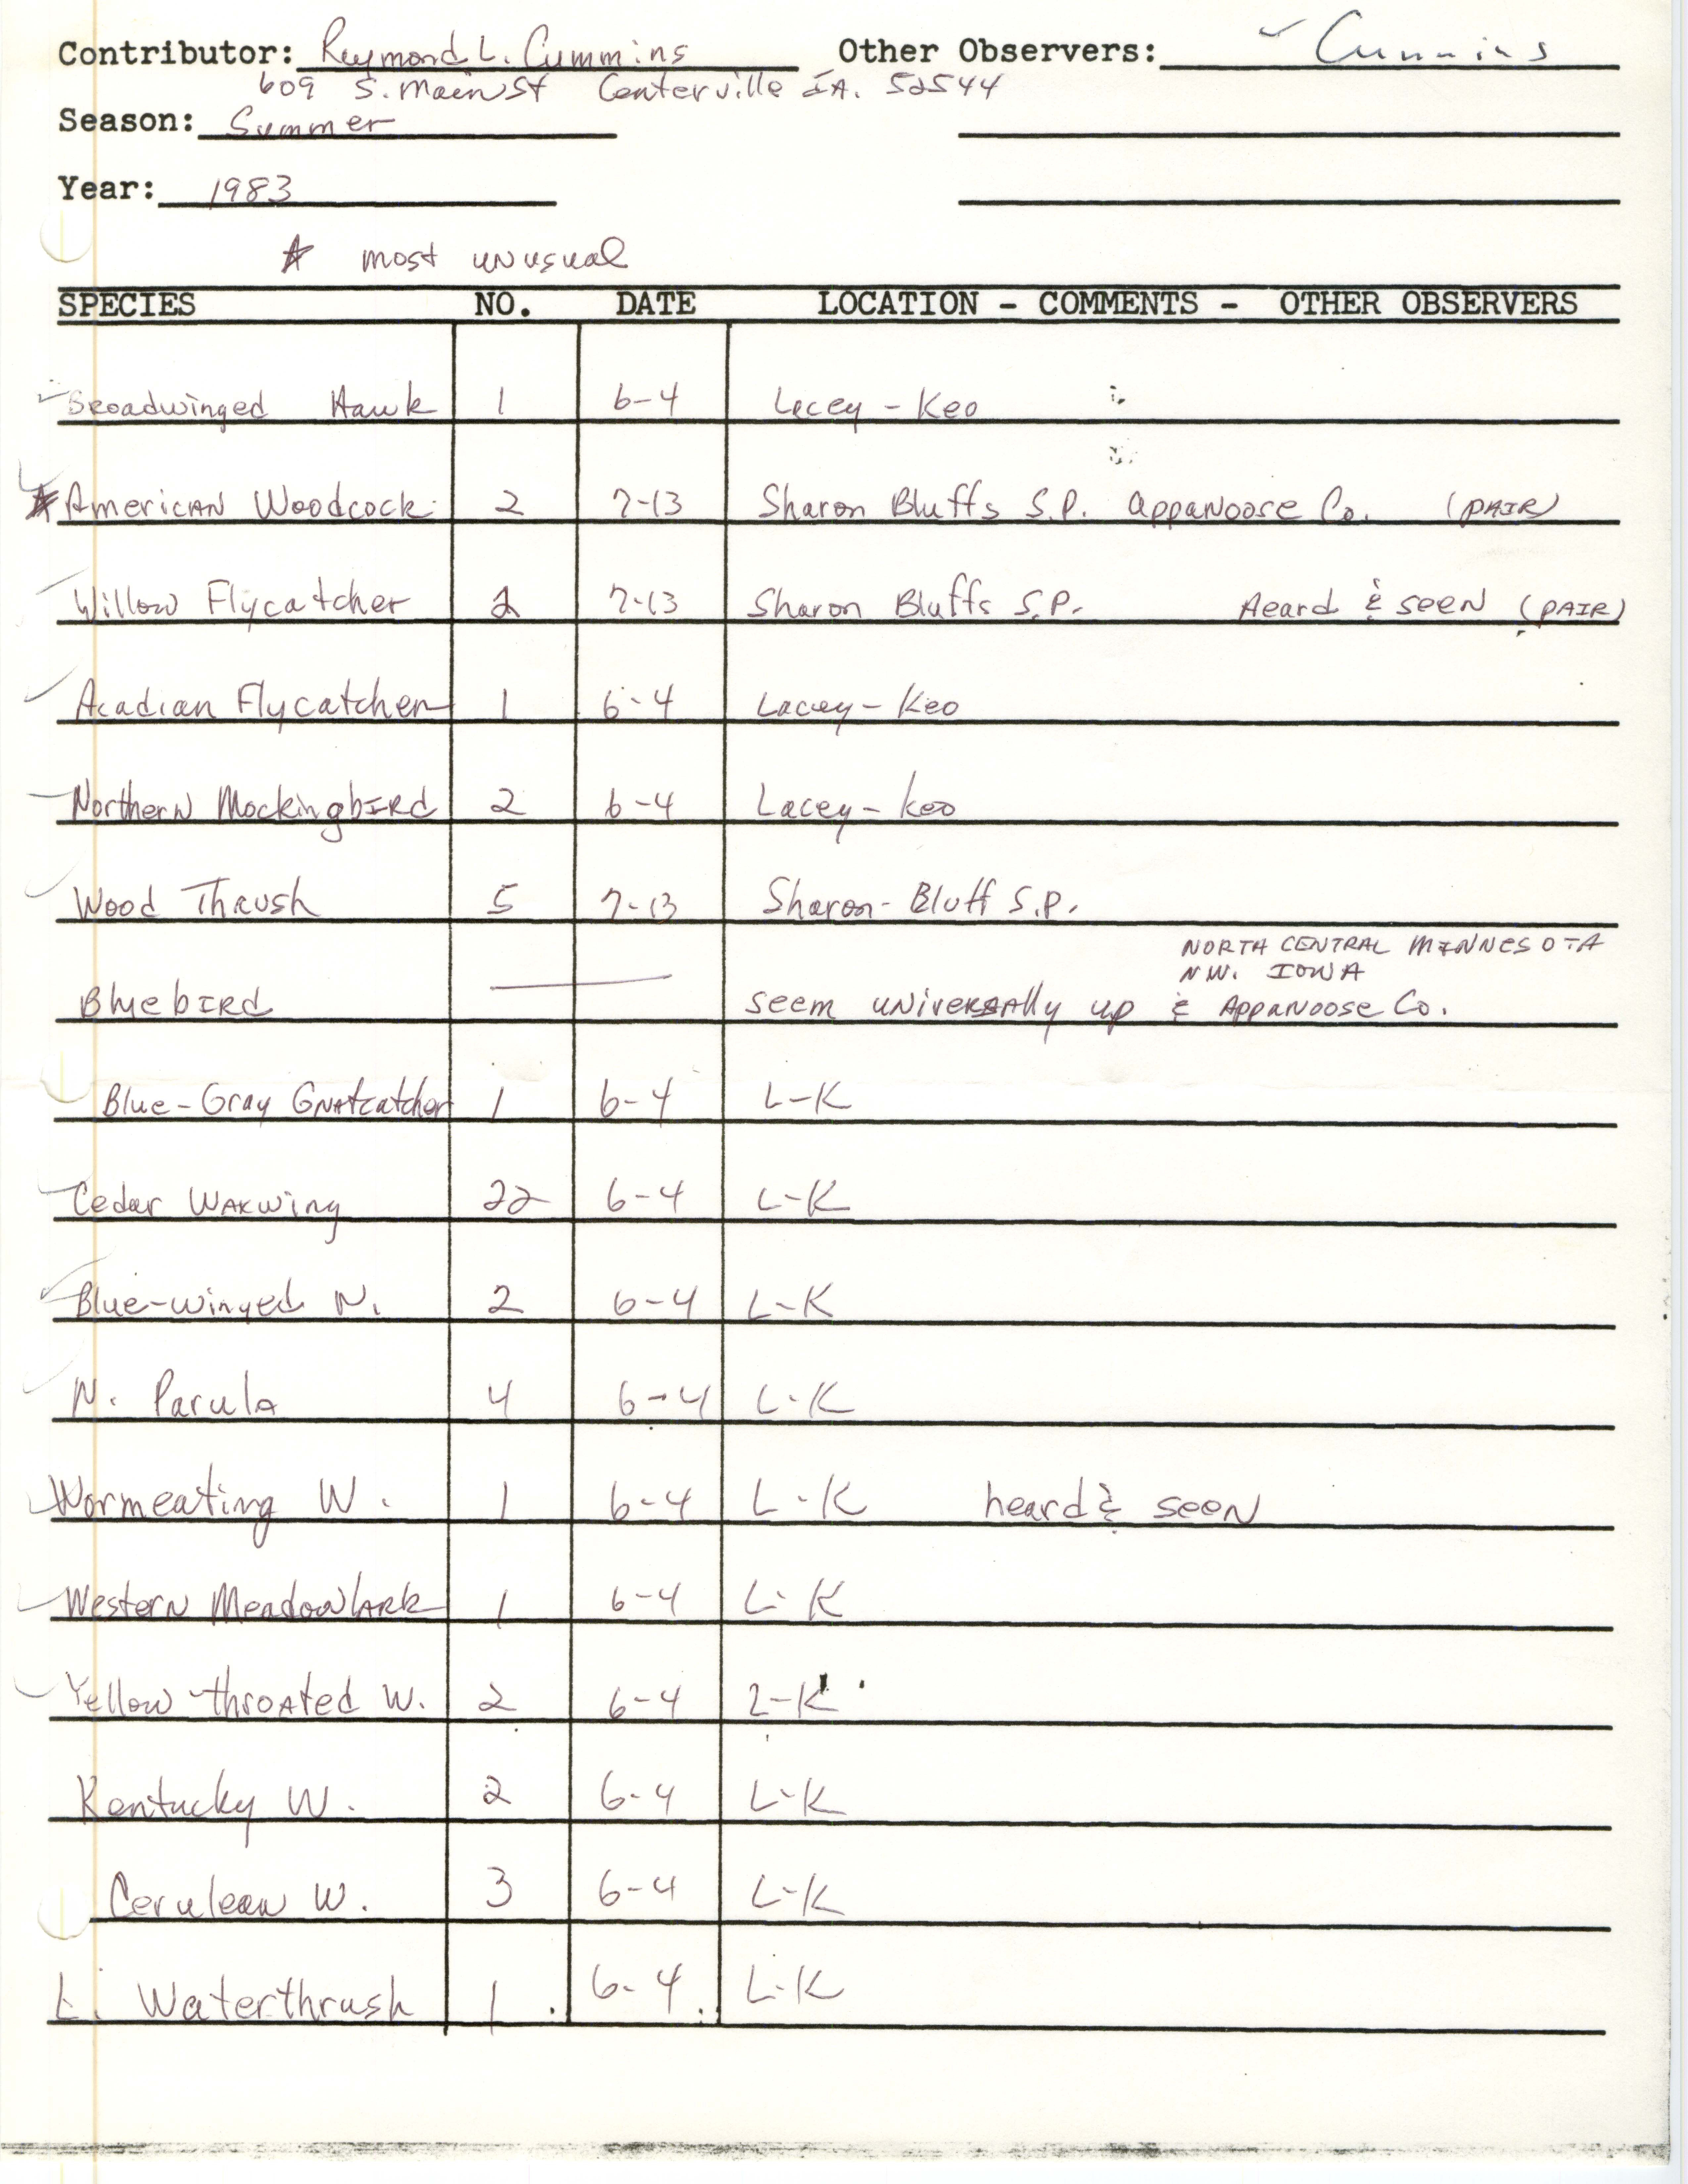 Annotated bird sighting list for Summer 1983 compiled by Raymond Cummins